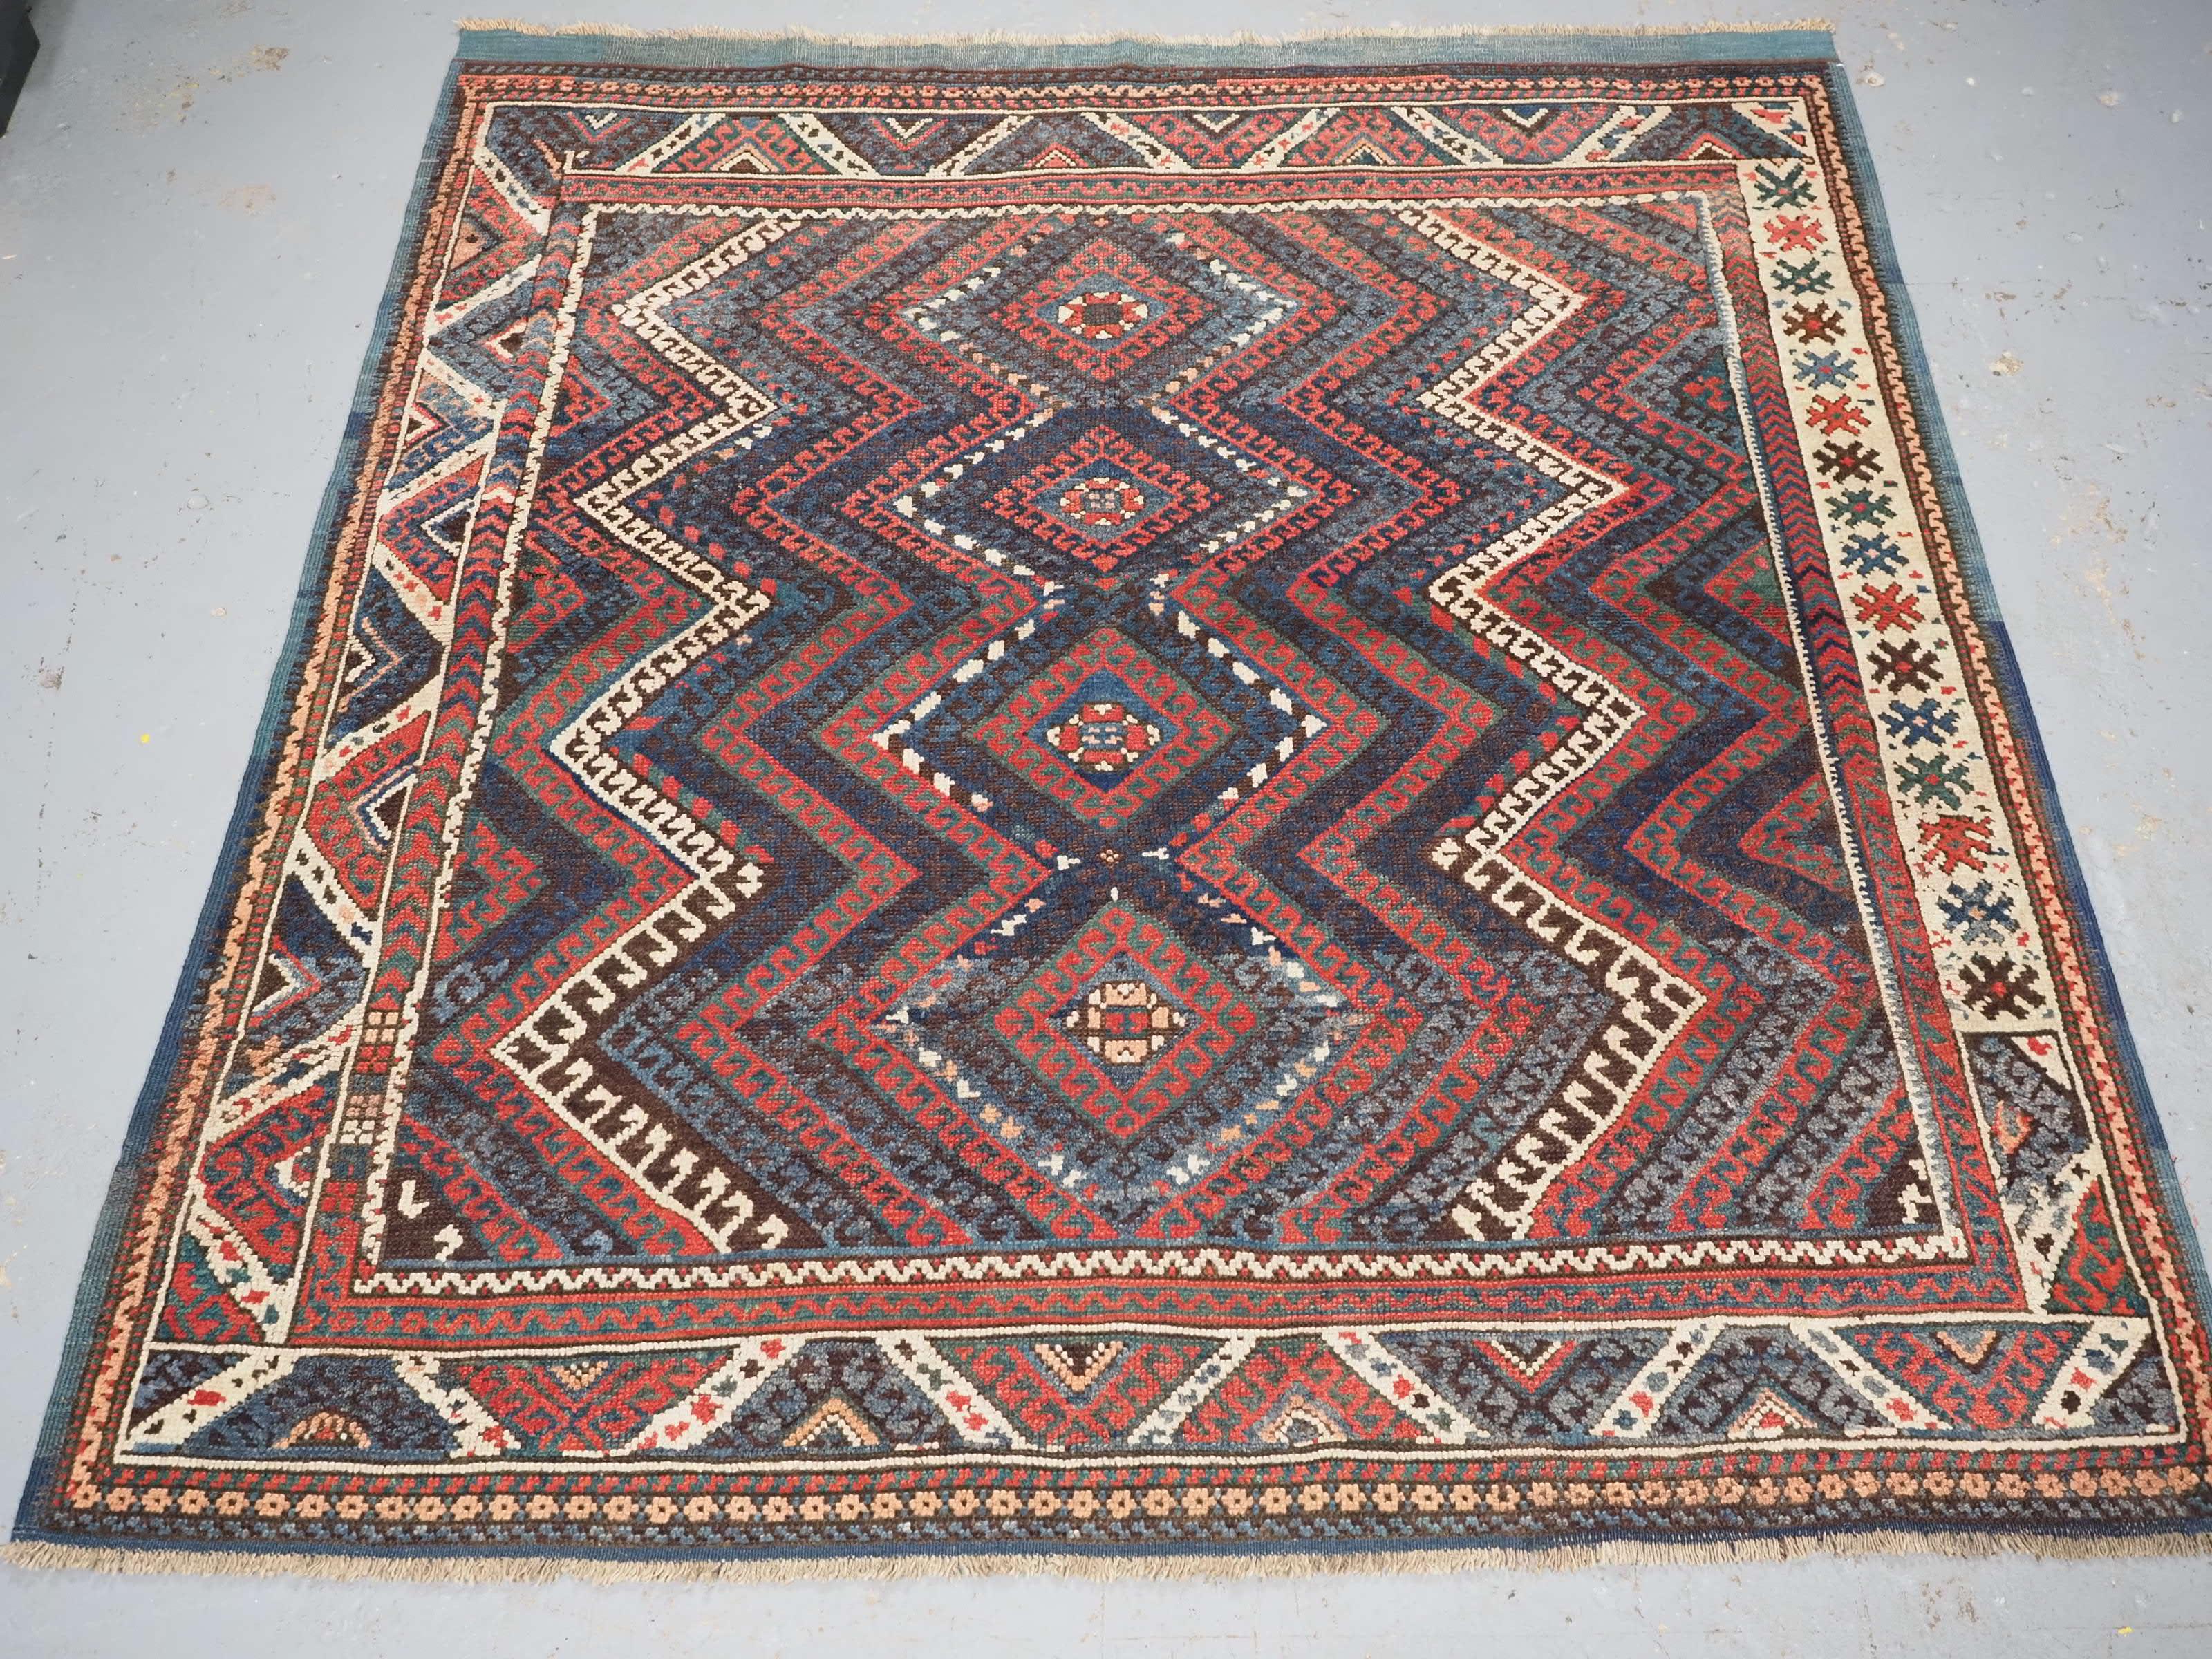 Size: 6ft 7in x 6ft 4in (200 x 192cm).

Antique Western Anatolian Bergama region Karakecili rug of classic design.

2nd half 19th century.

A very good example of a West Anatolian Karakecili rug with a traditional design, the rug has a the usual